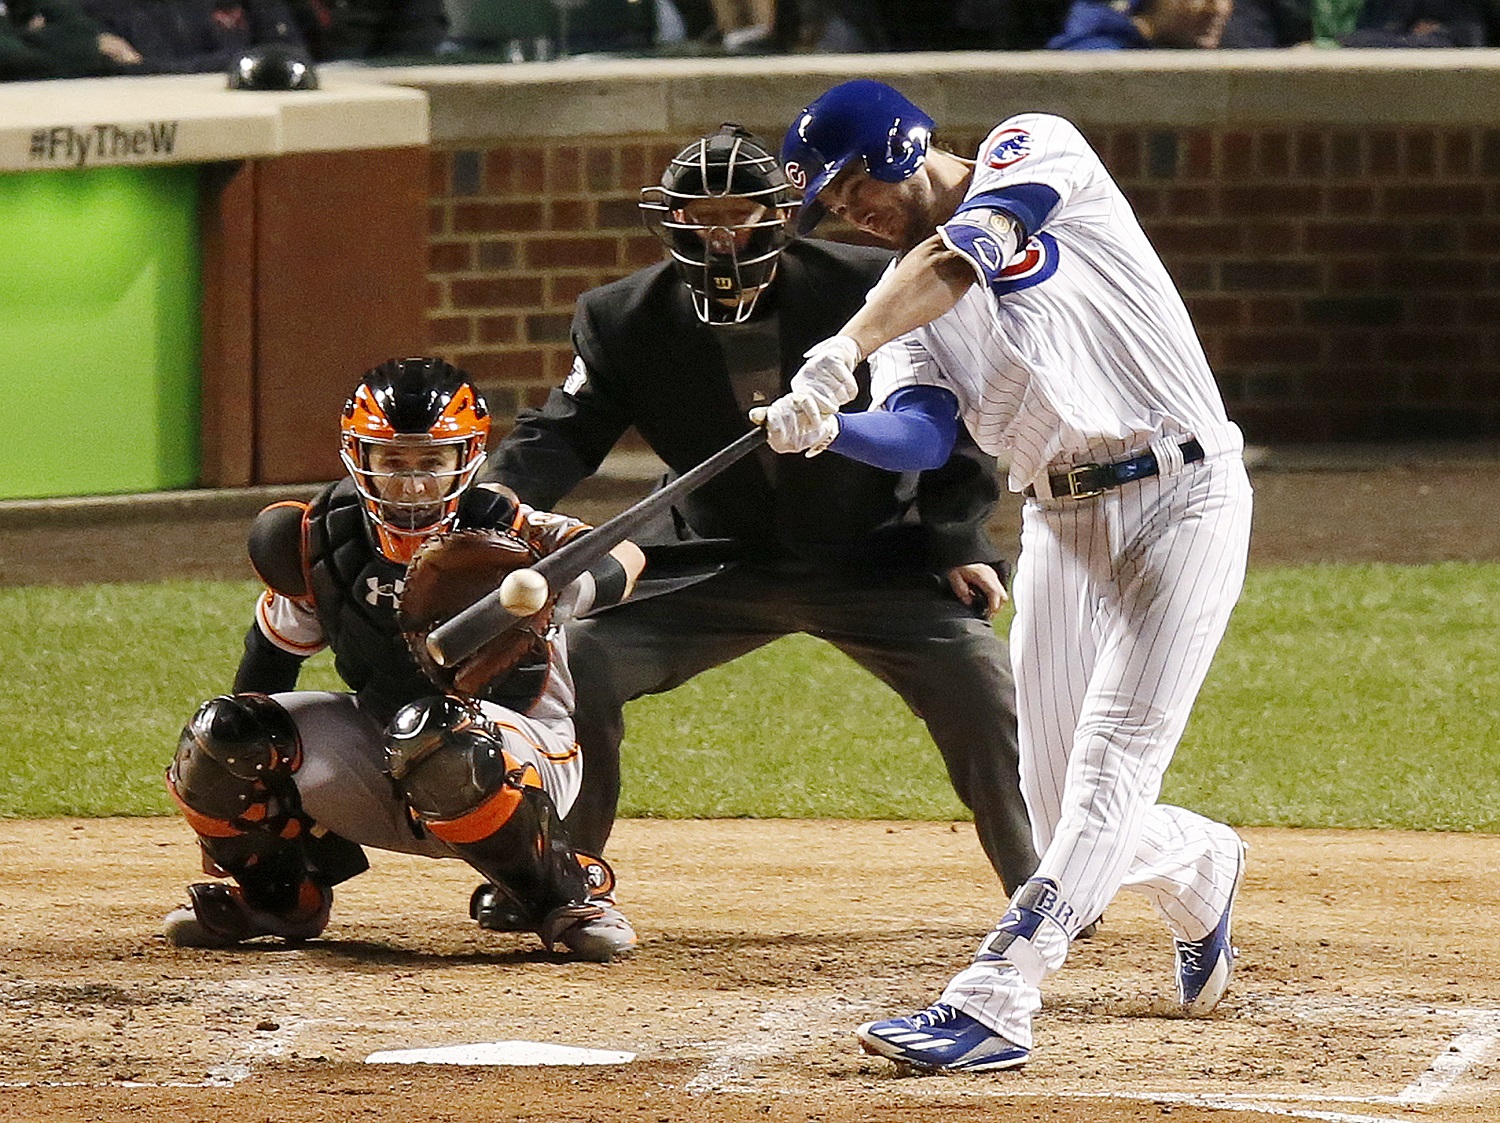 Chicago Cubs' Kris Bryant hits a double in the fourth inning of Game 1 of baseball's National League Division Series against the San Francisco Giants, Friday, Oct. 7, 2016, in Chicago. (AP Photo/Charles Rex Arbogast)